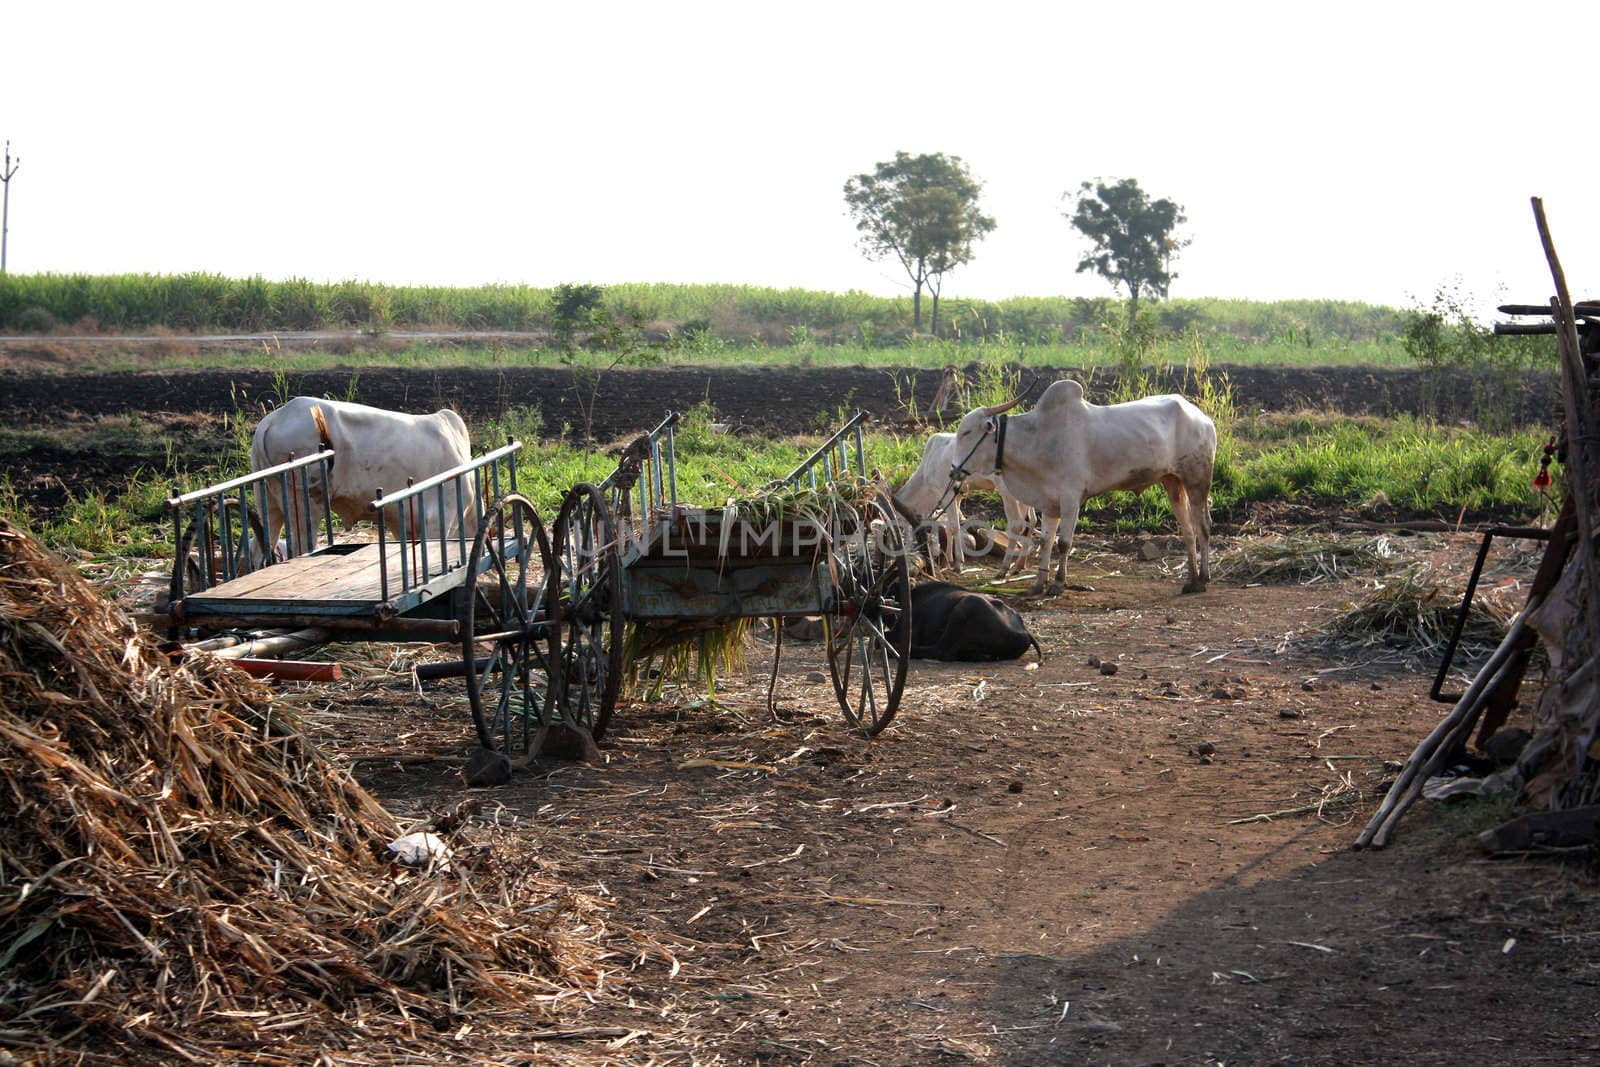 A morning scene on a farm in a countryside Indian village.